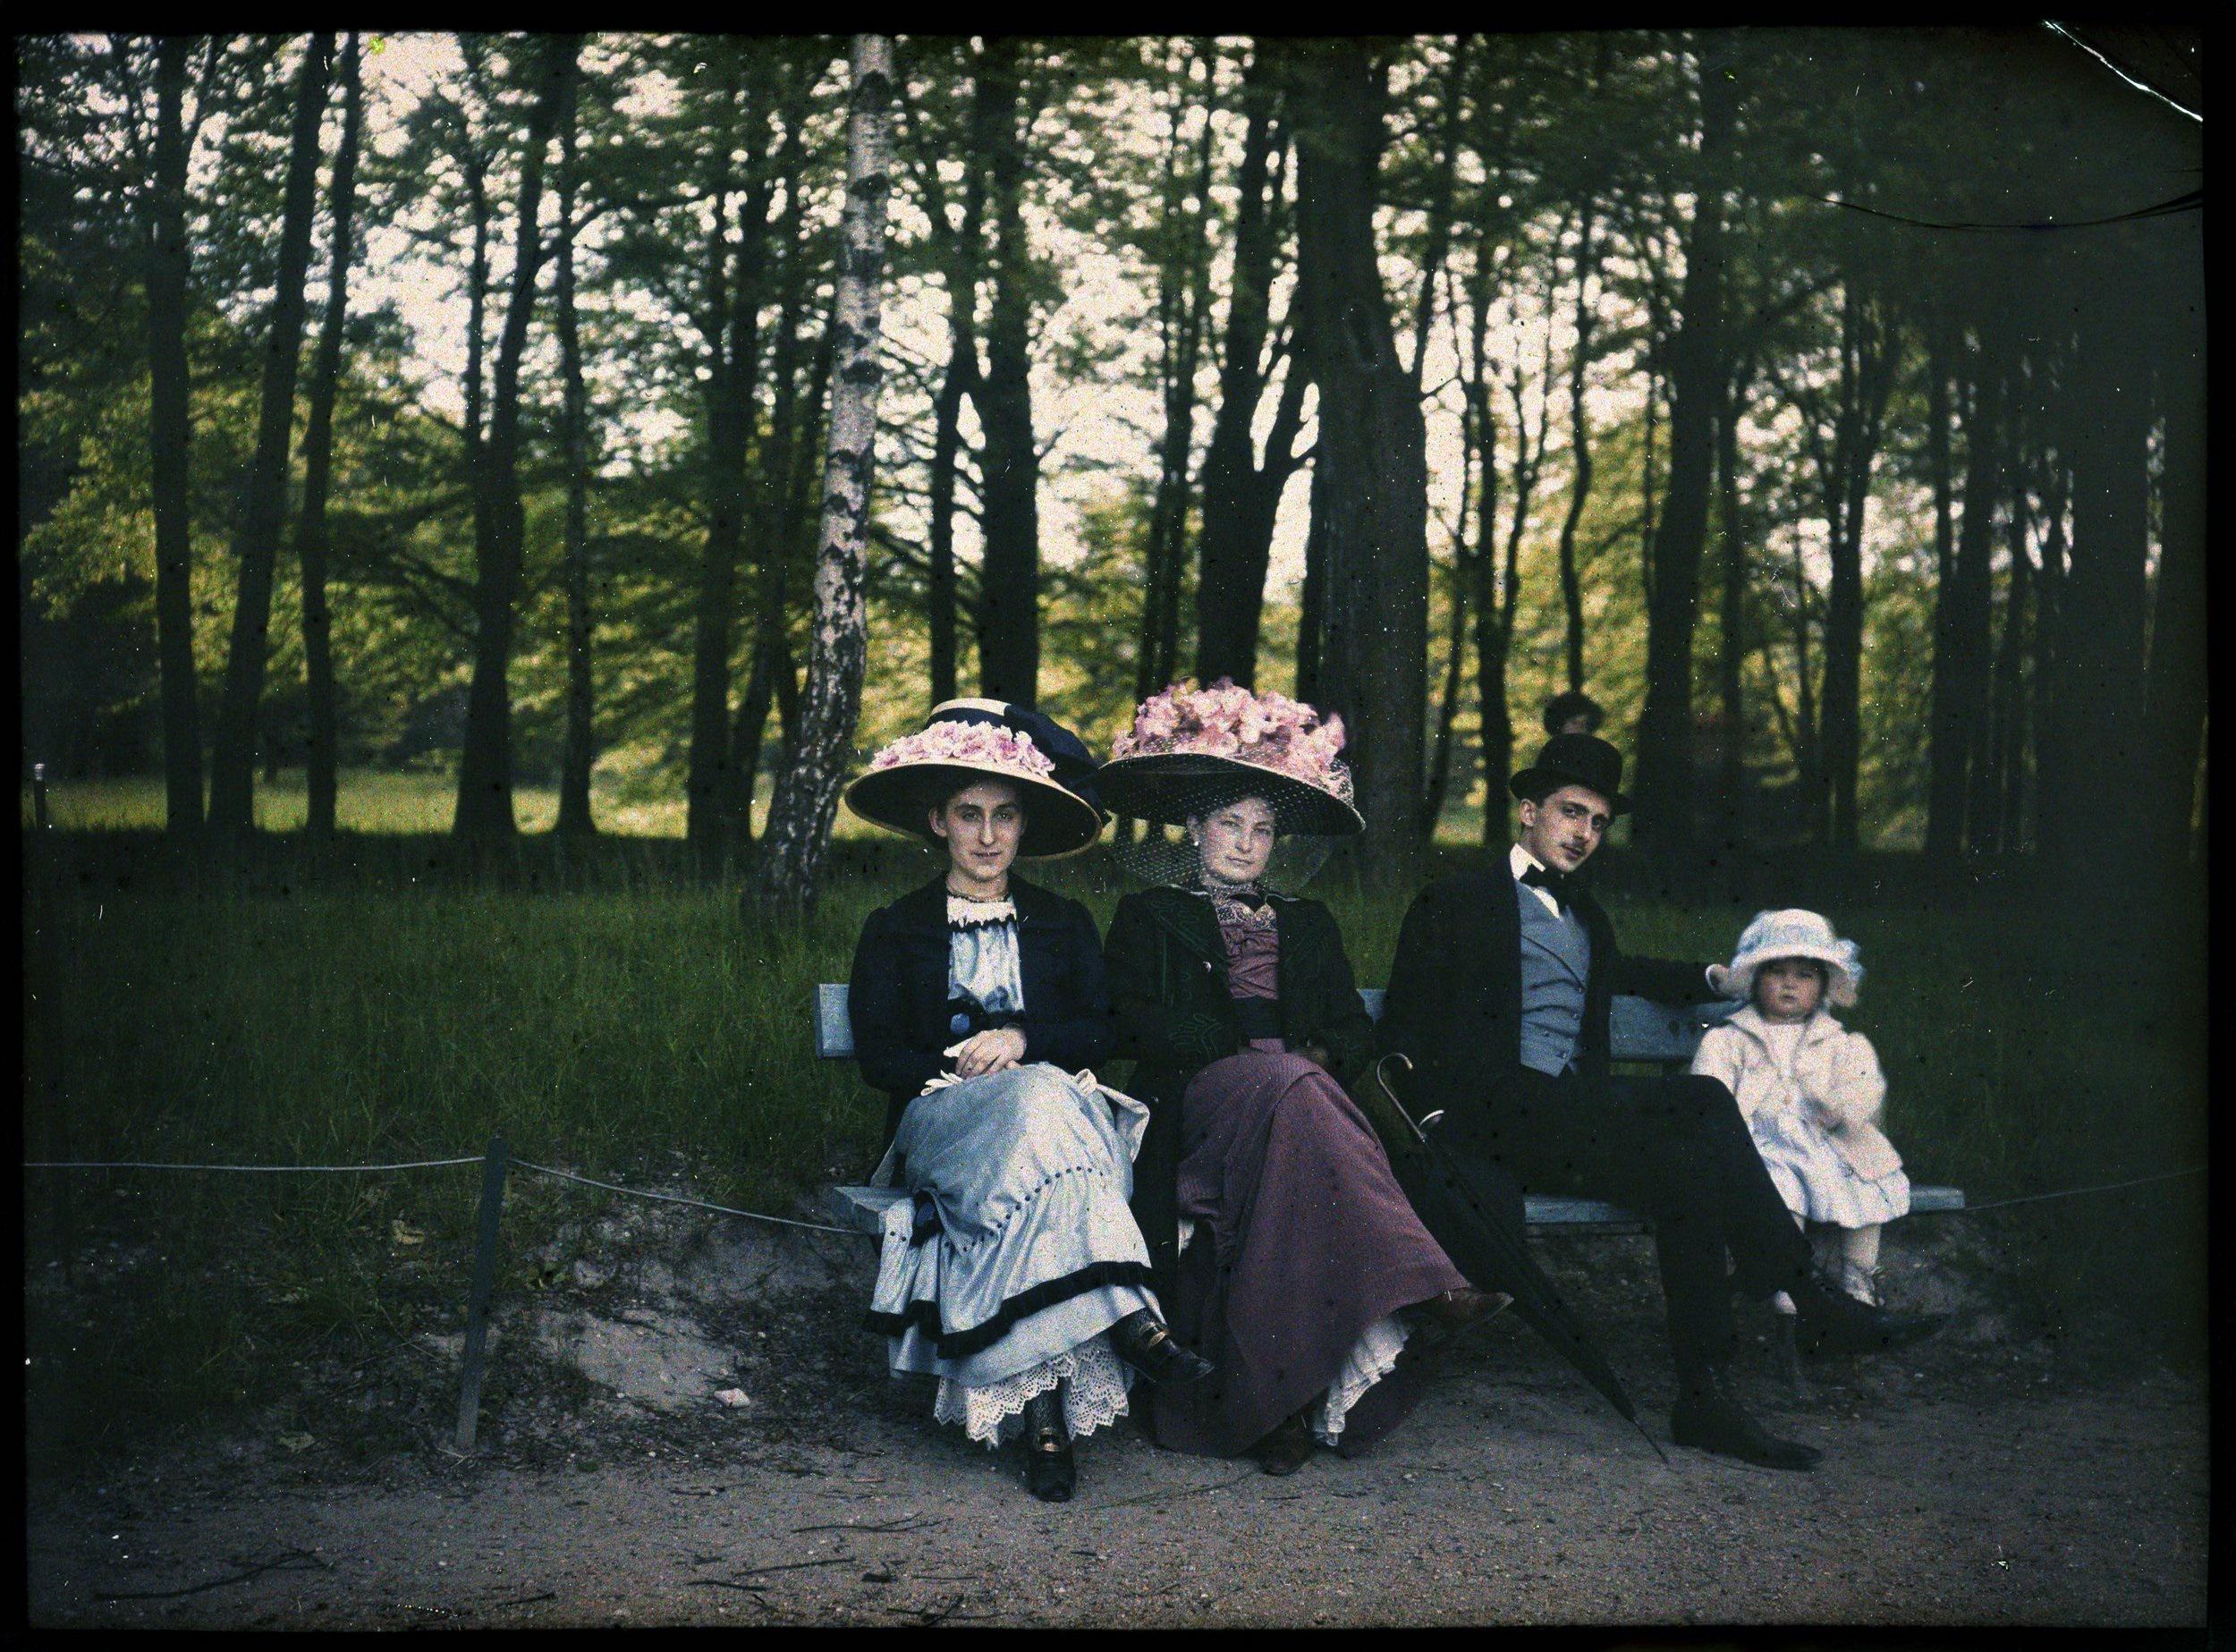 1908c - Early autochrome color photograph taken at the Park of the Golden Head in Lyon, France.jpg